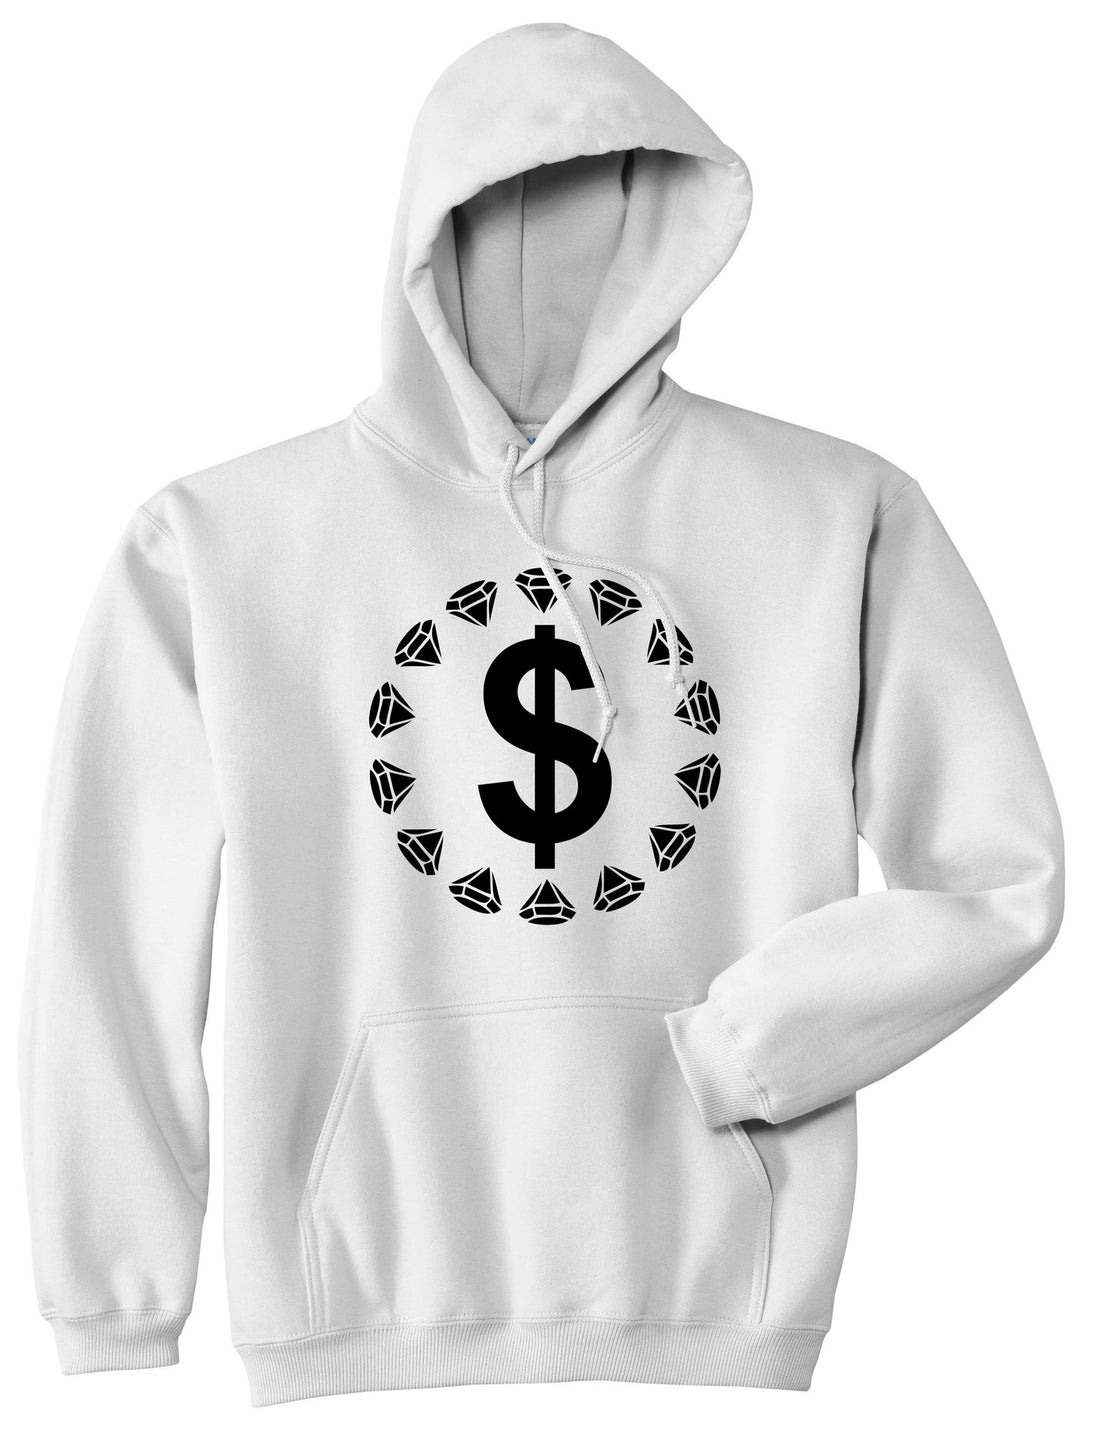 Diamonds Money Sign Logo Pullover Hoodie Hoody in White by Kings Of NY